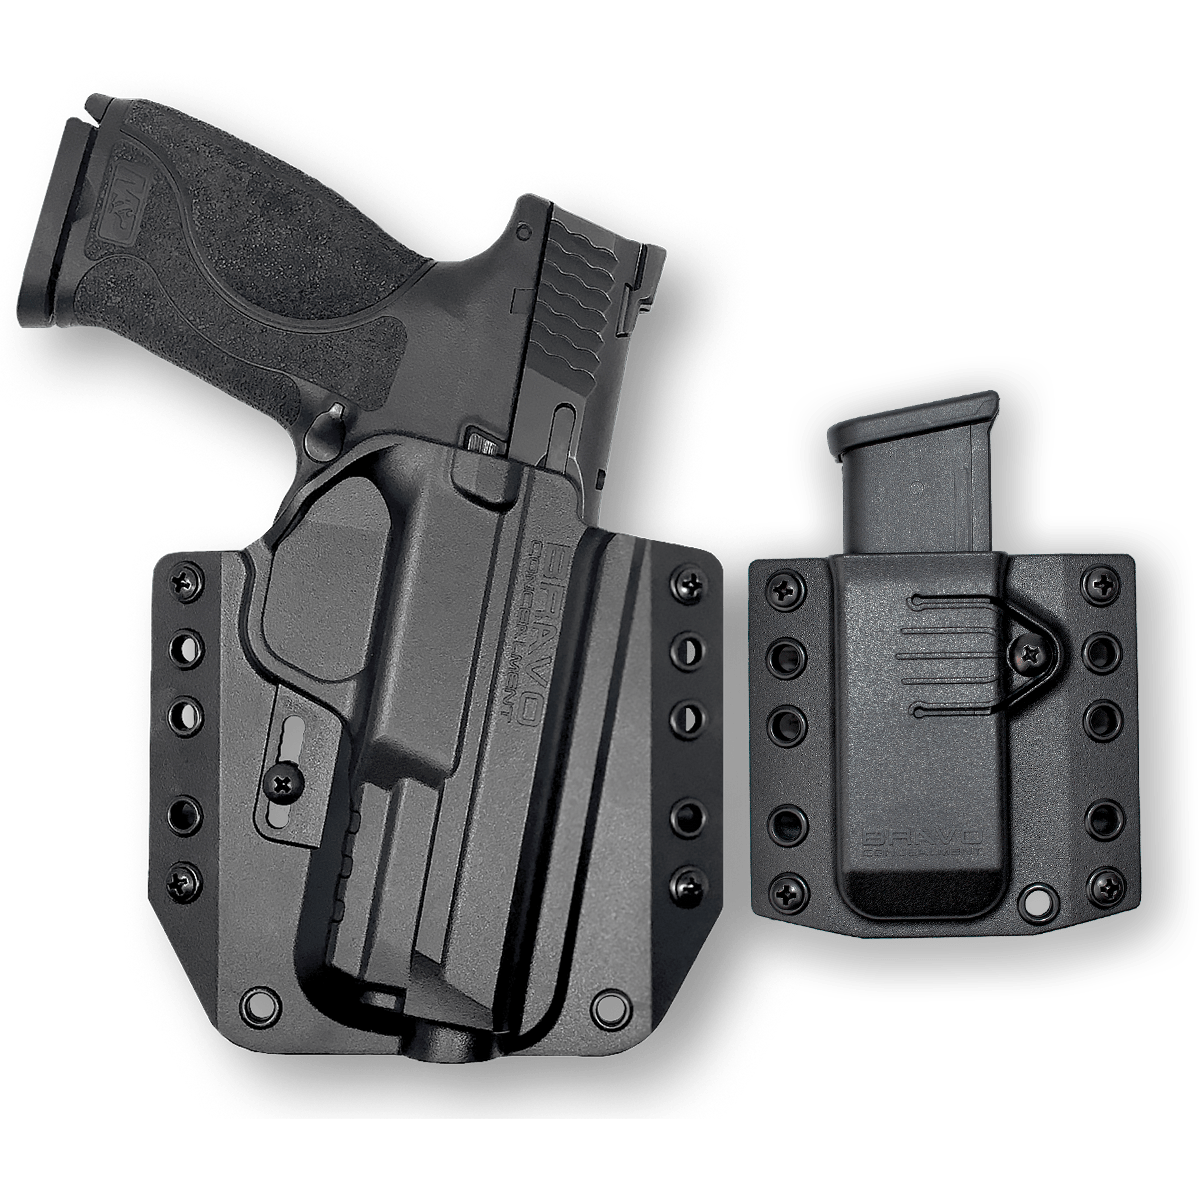 The Curve OWB - Gun Holsters, Magazine Carriers, and Tactical Gear